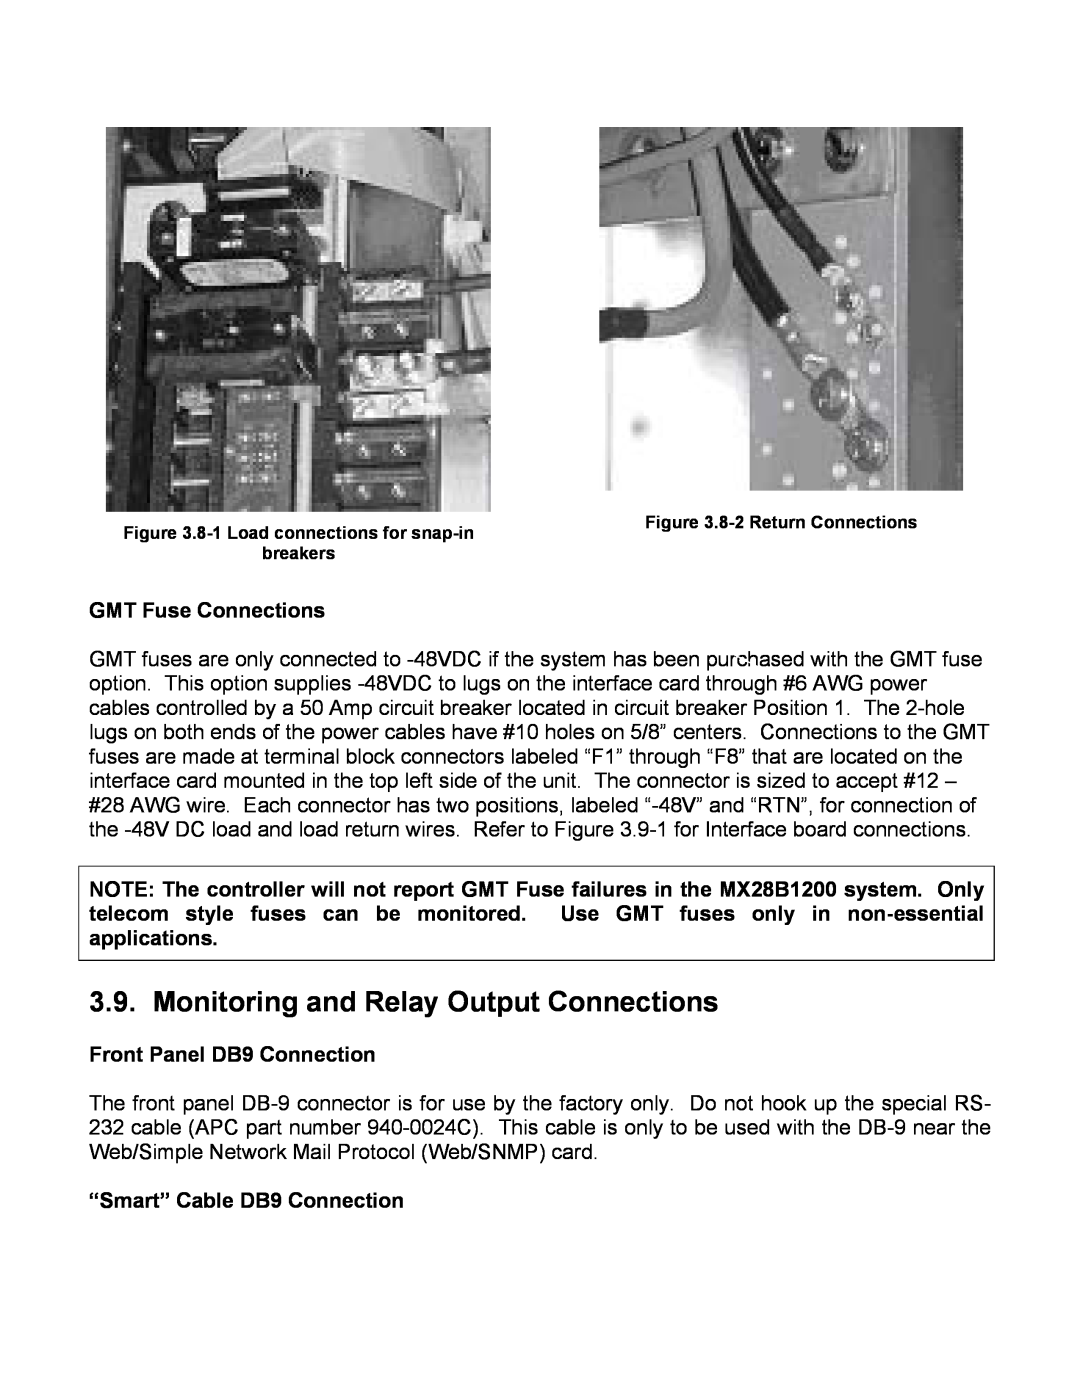 American Power Conversion MX28B4800 Monitoring and Relay Output Connections, GMT Fuse Connections, 8-2 Return Connections 